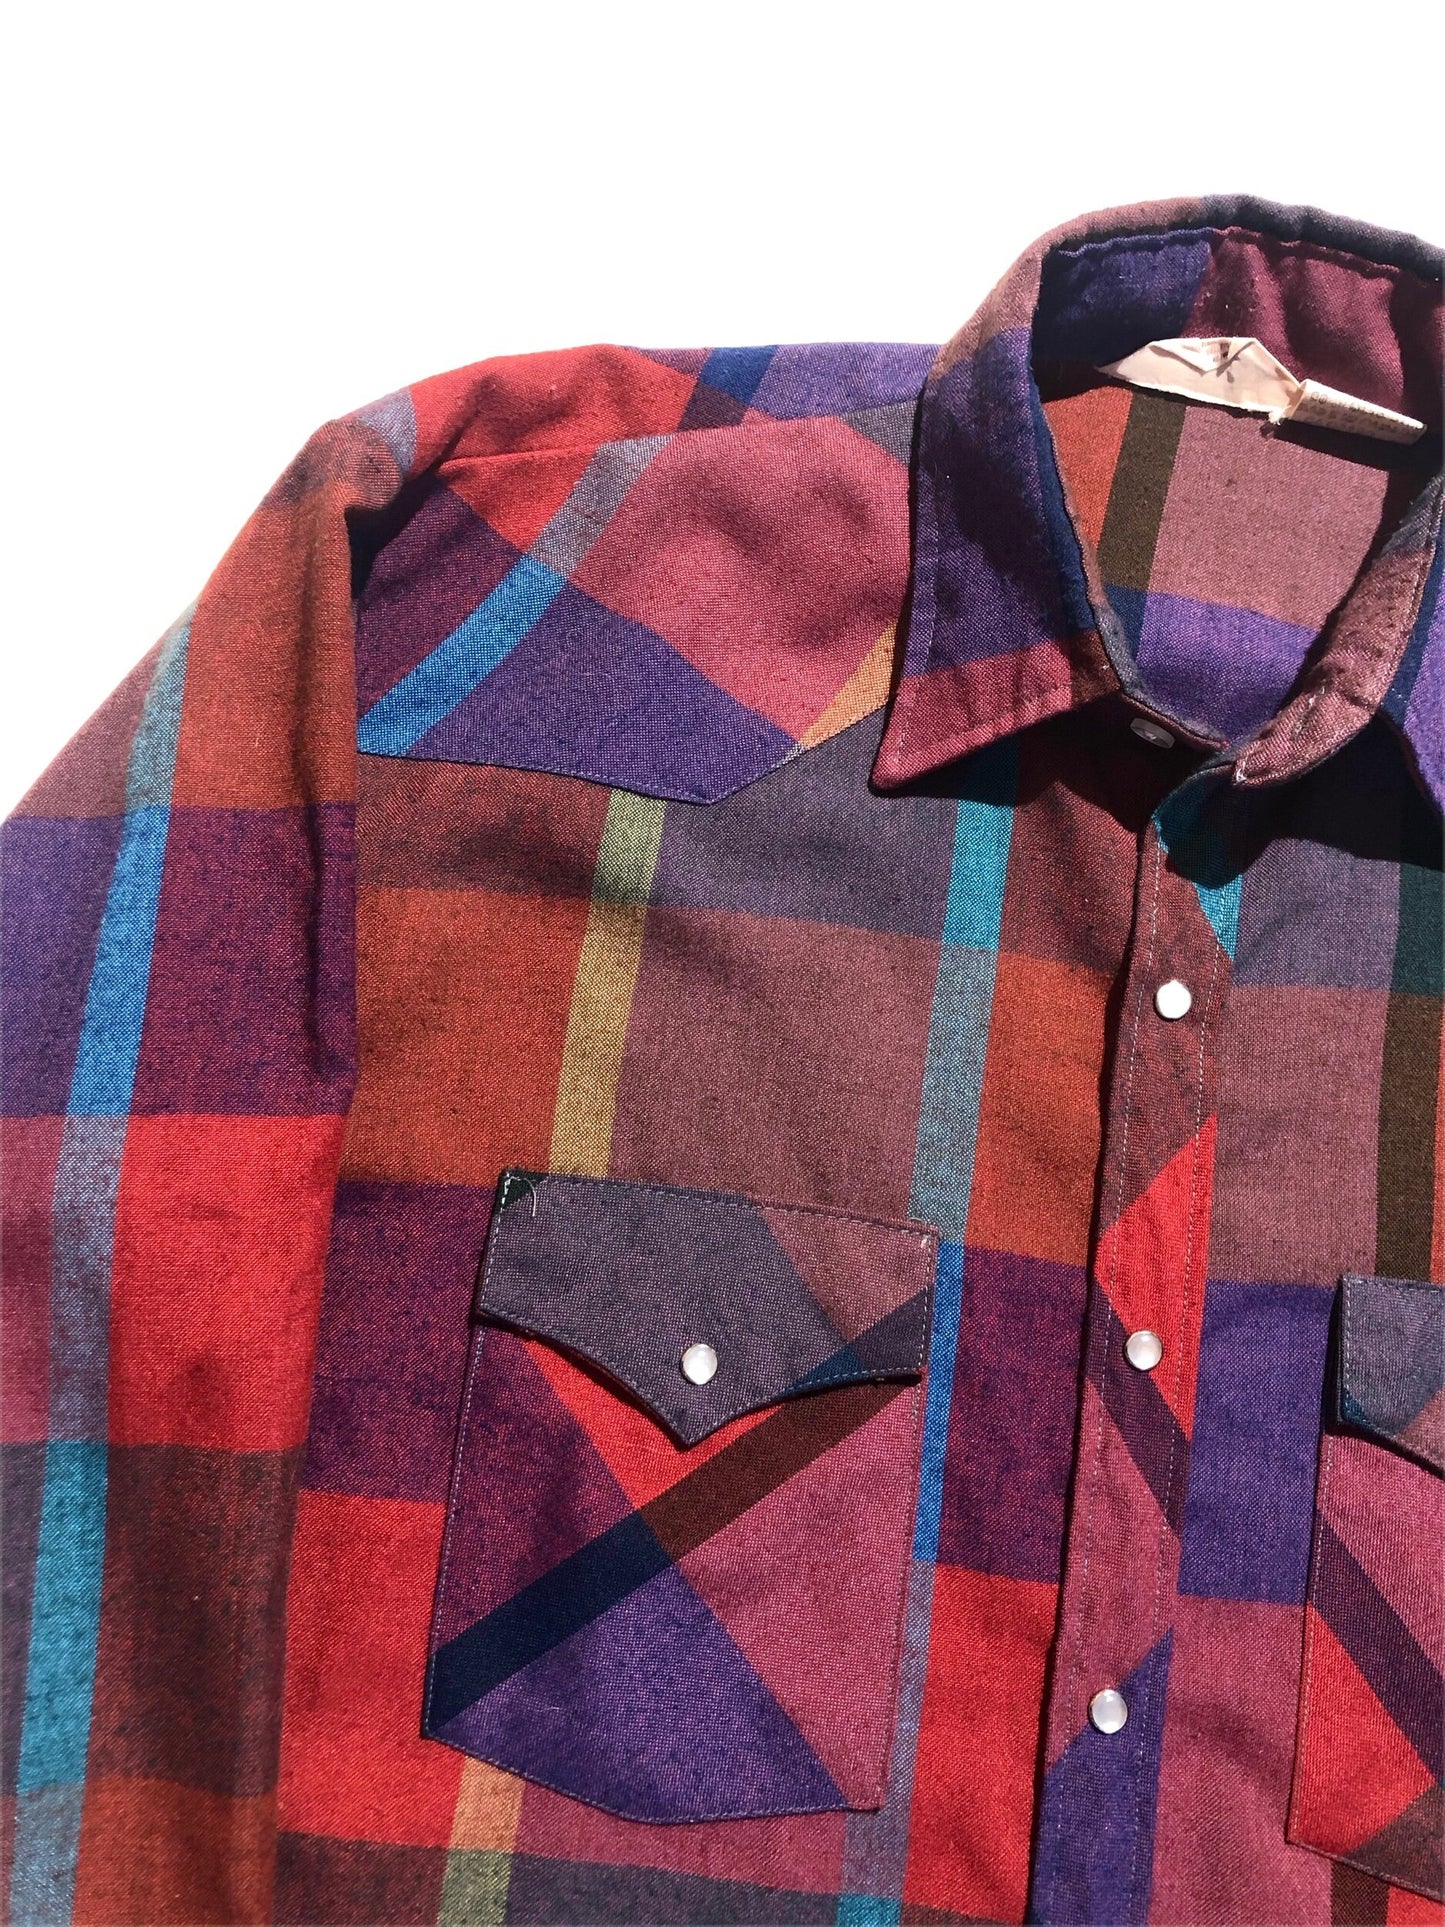 Vintage Flannel Shirt (Pearl Snaps)